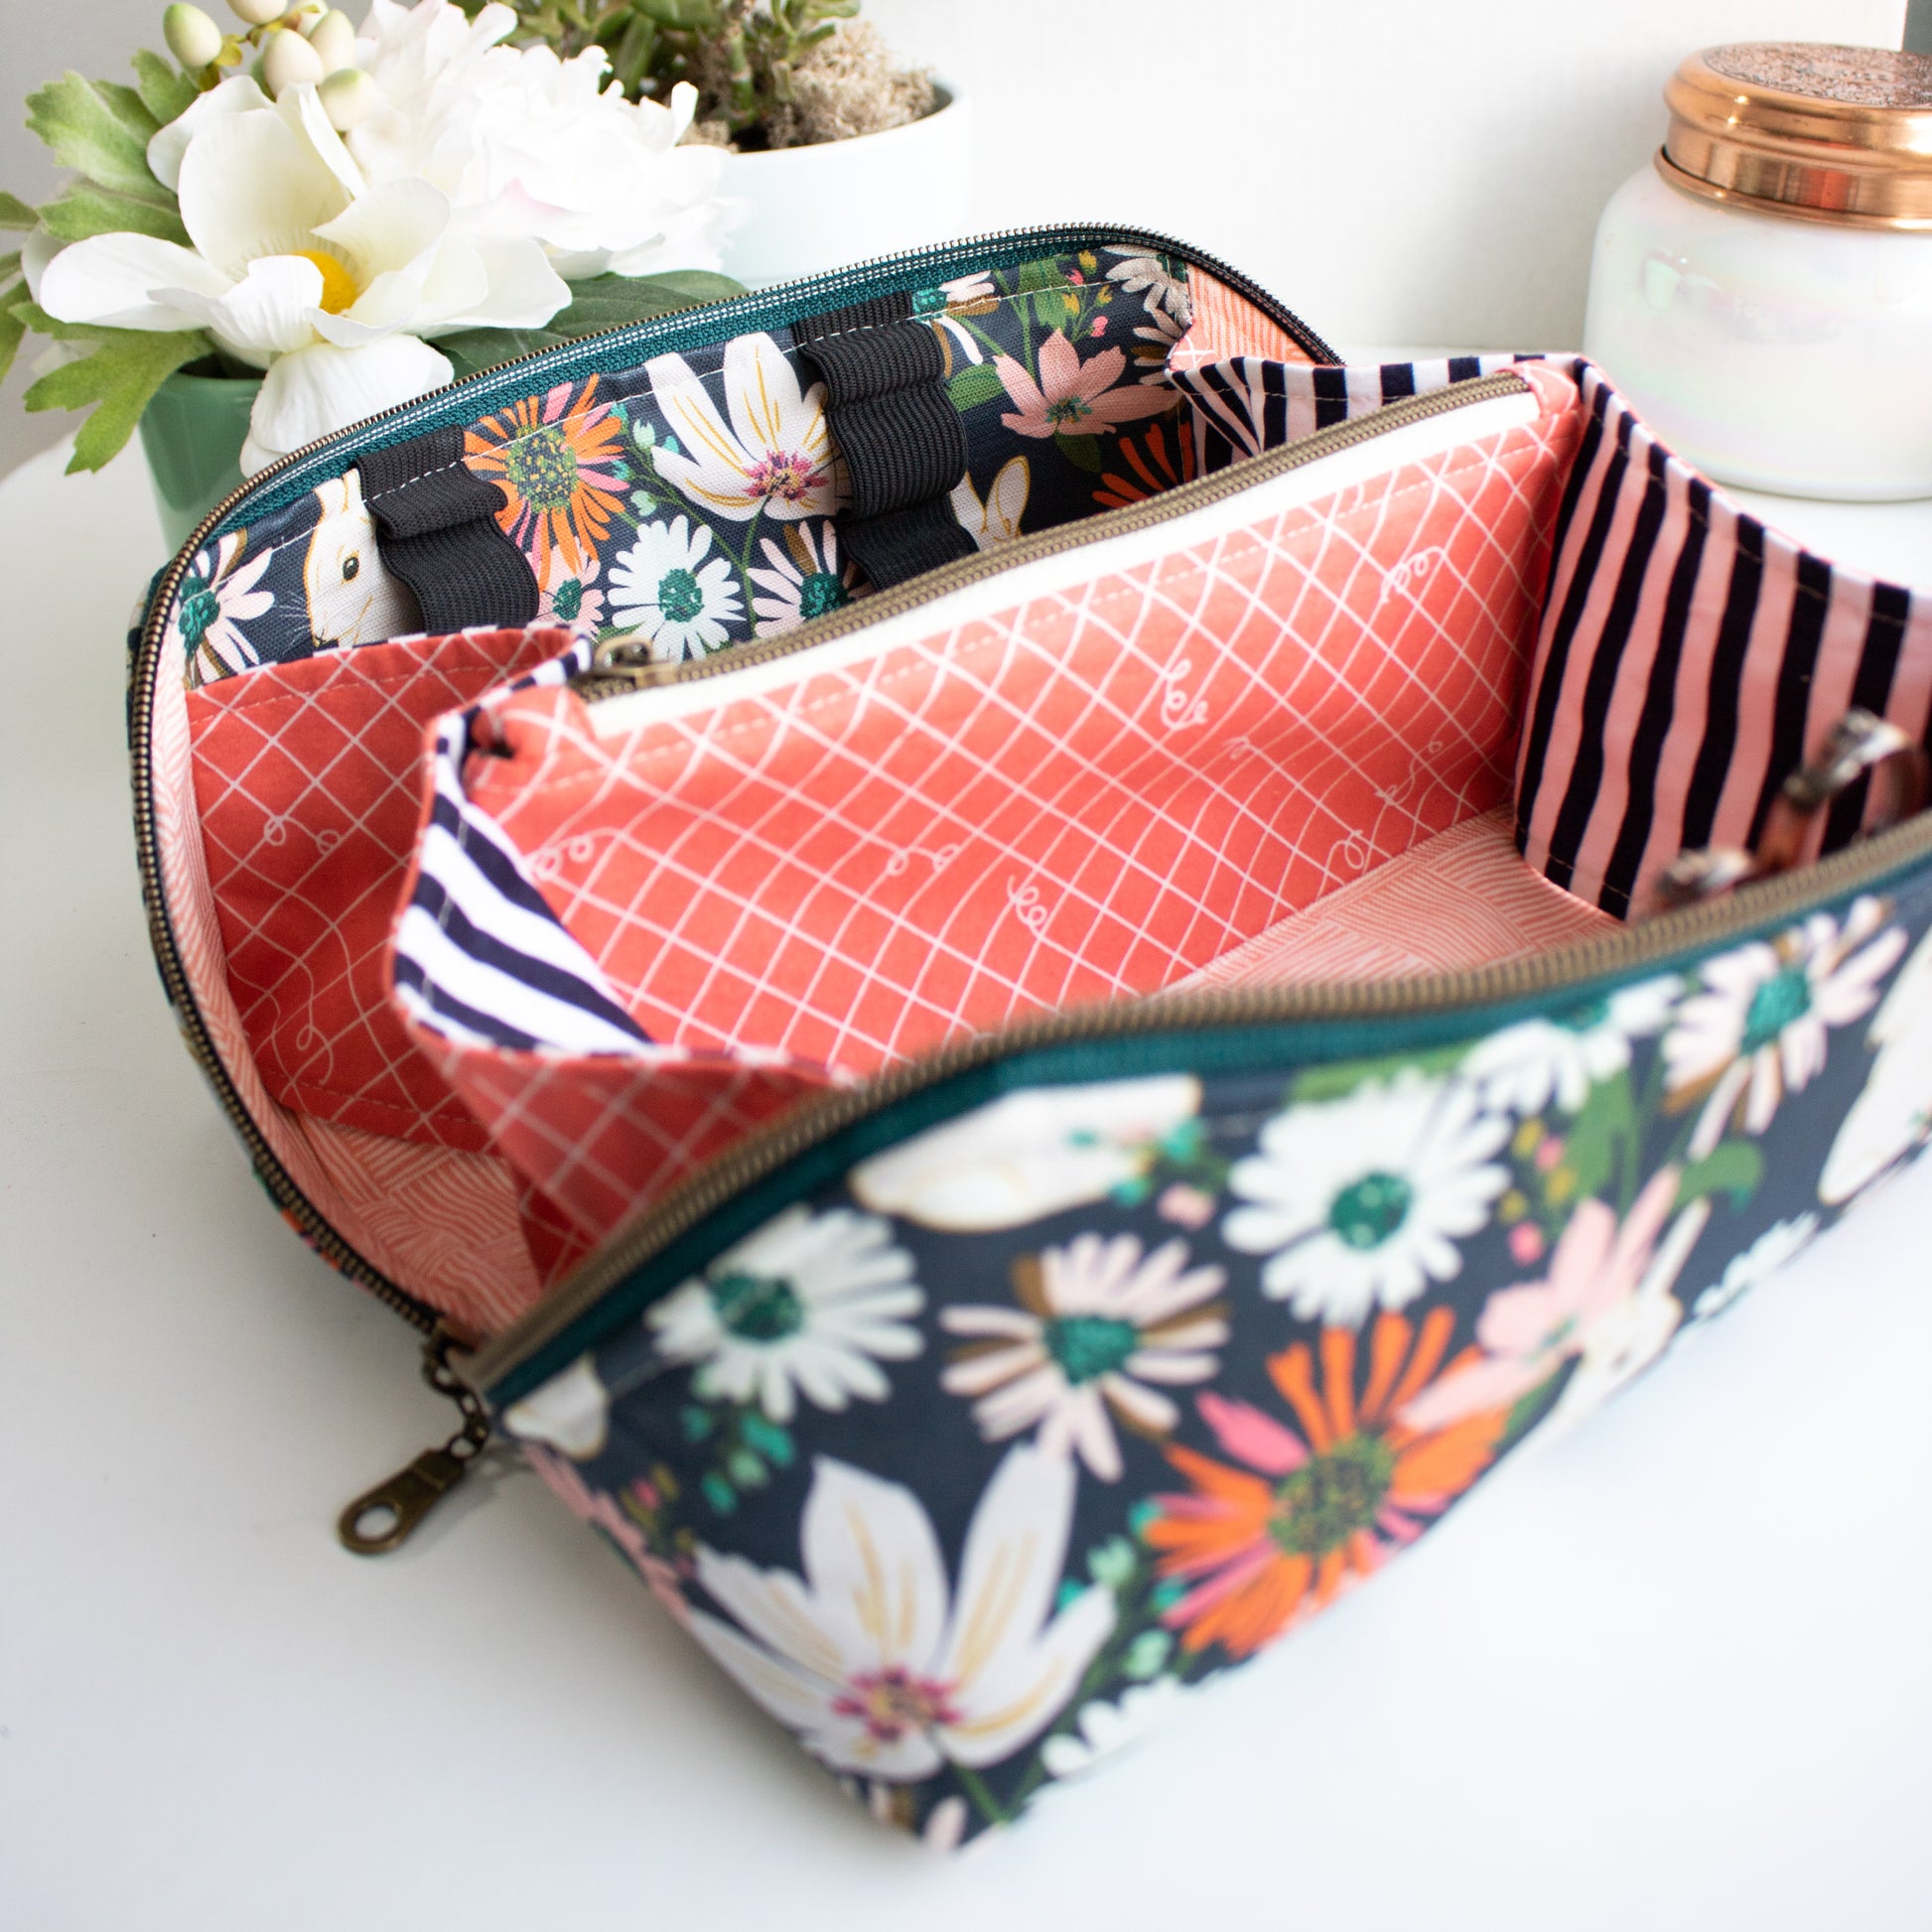 How to sew a Purse - 2 Easy sewing tutorials - SewGuide